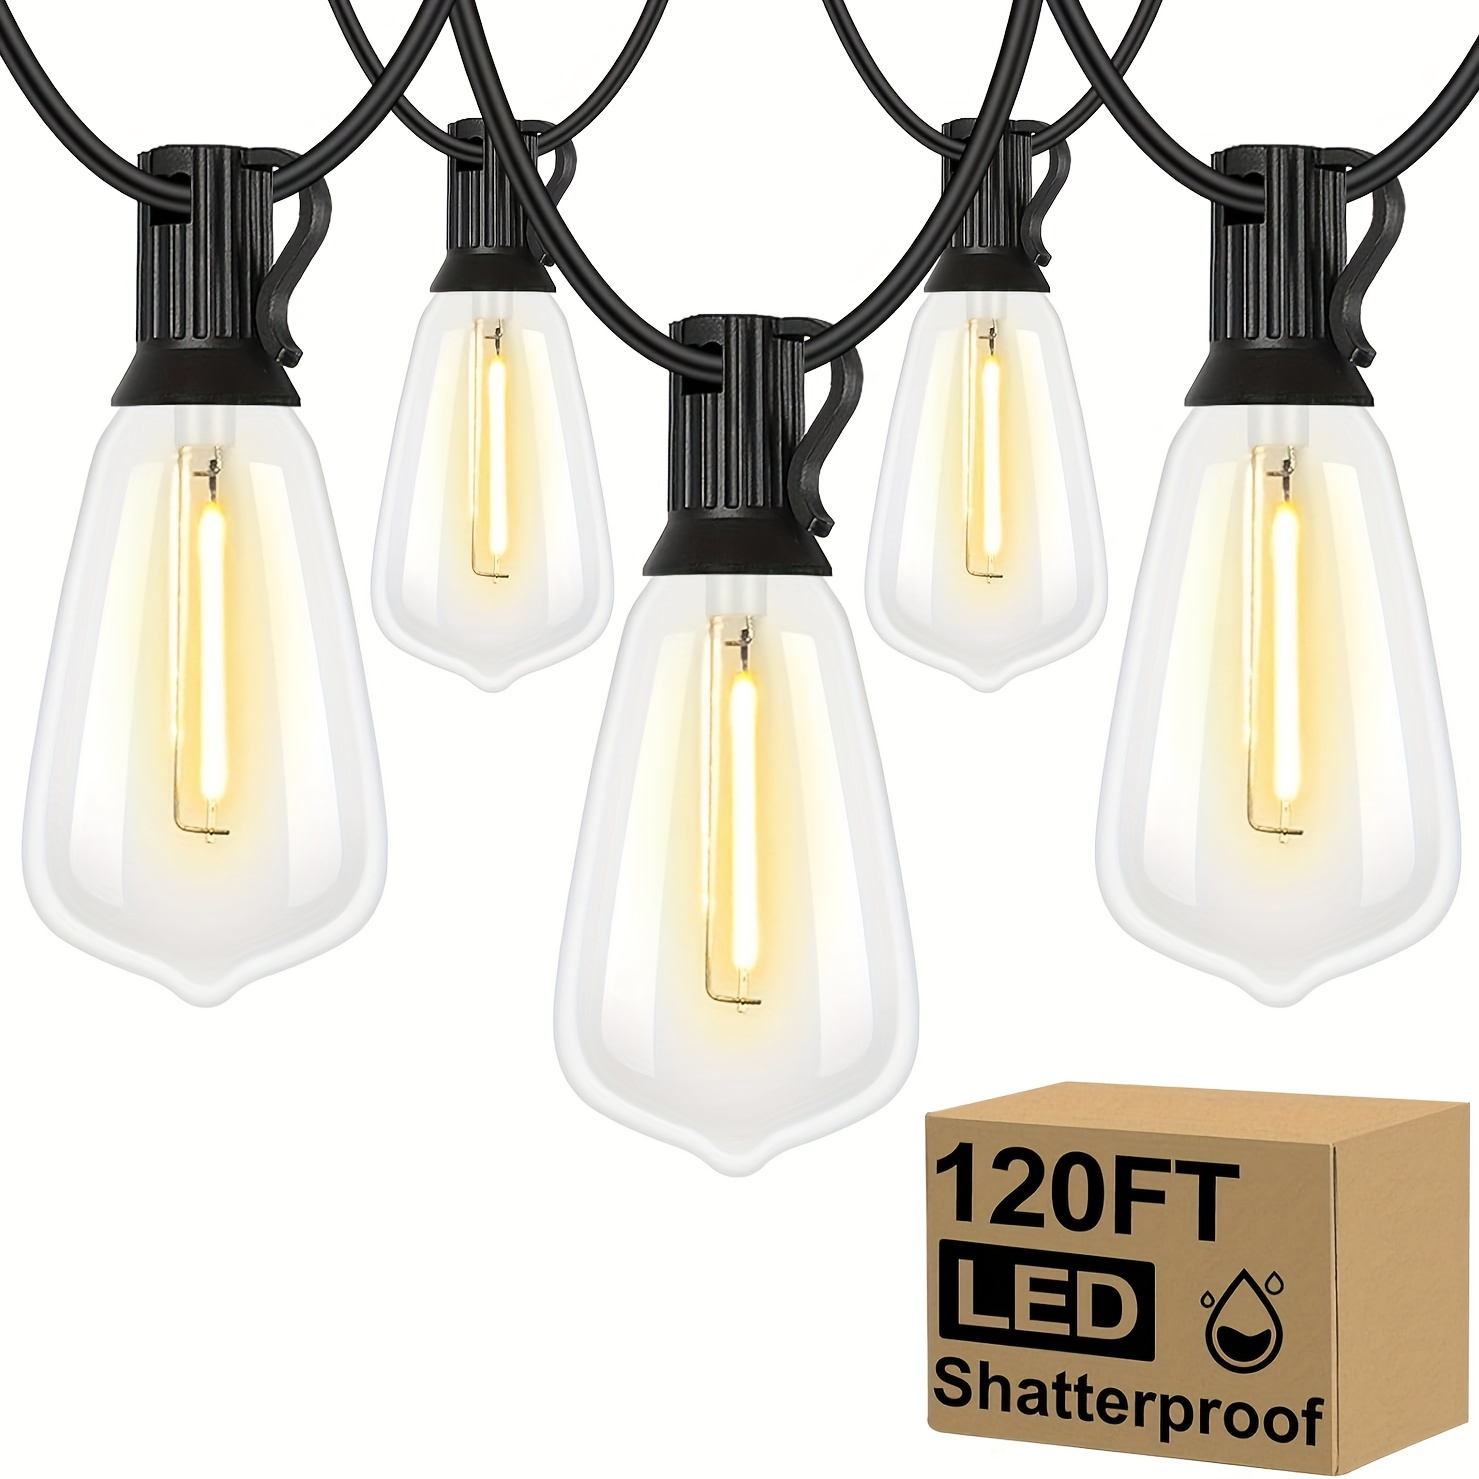 

120ft Outdoor String Lights, 2700k Bright Led Patio Lights With 62 St38 Shatterproof Vintage Bulbs, Retro Connectable Edison String Lights For Outside, Garden, Balcony, Porch